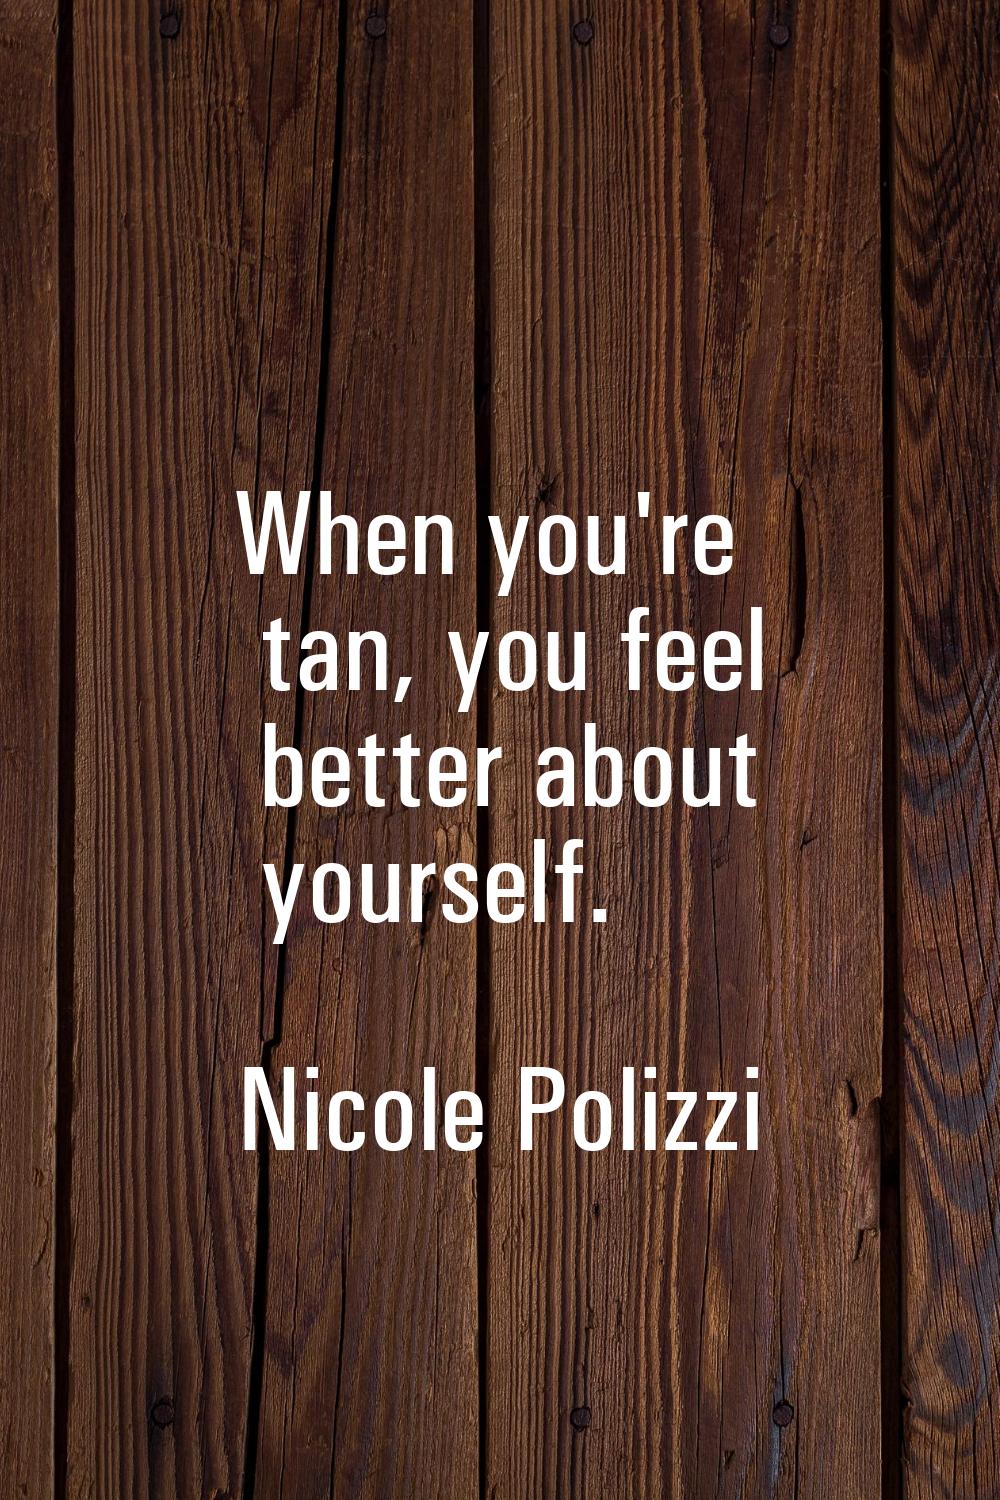 When you're tan, you feel better about yourself.